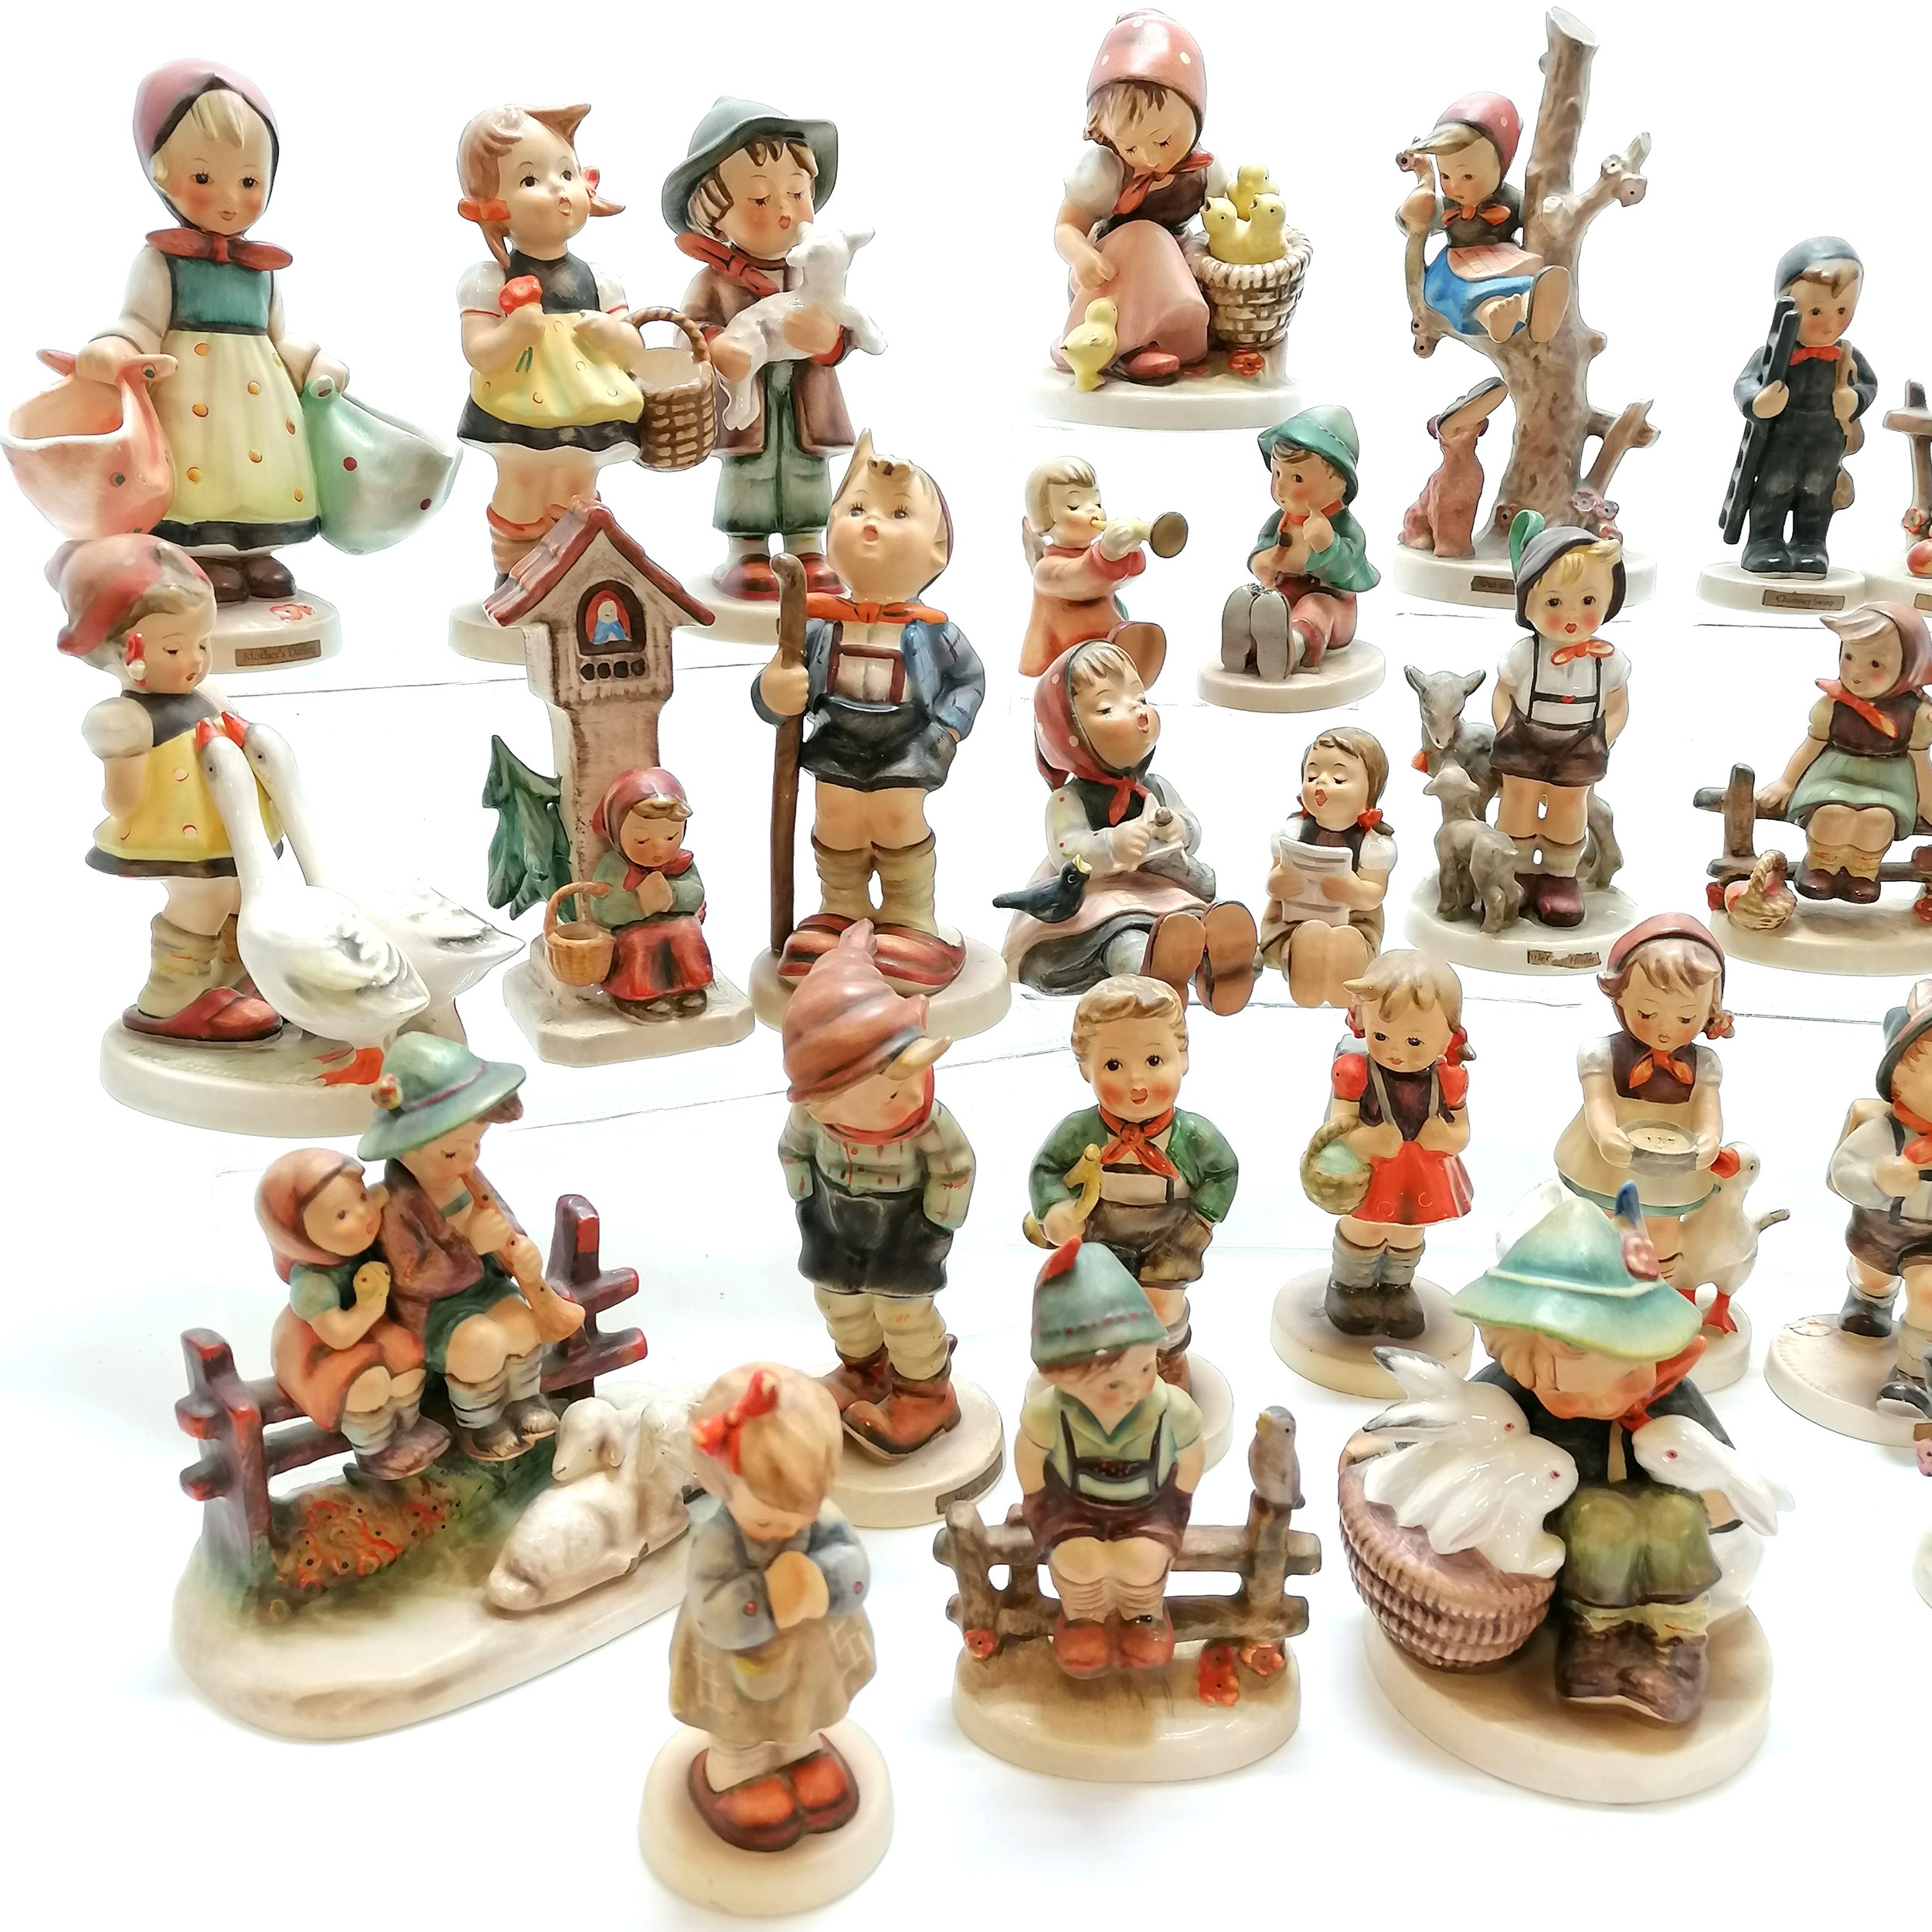 Collection / lot (29) of Hummel & Goebel figurines - some still have original labels Condition - Image 3 of 4